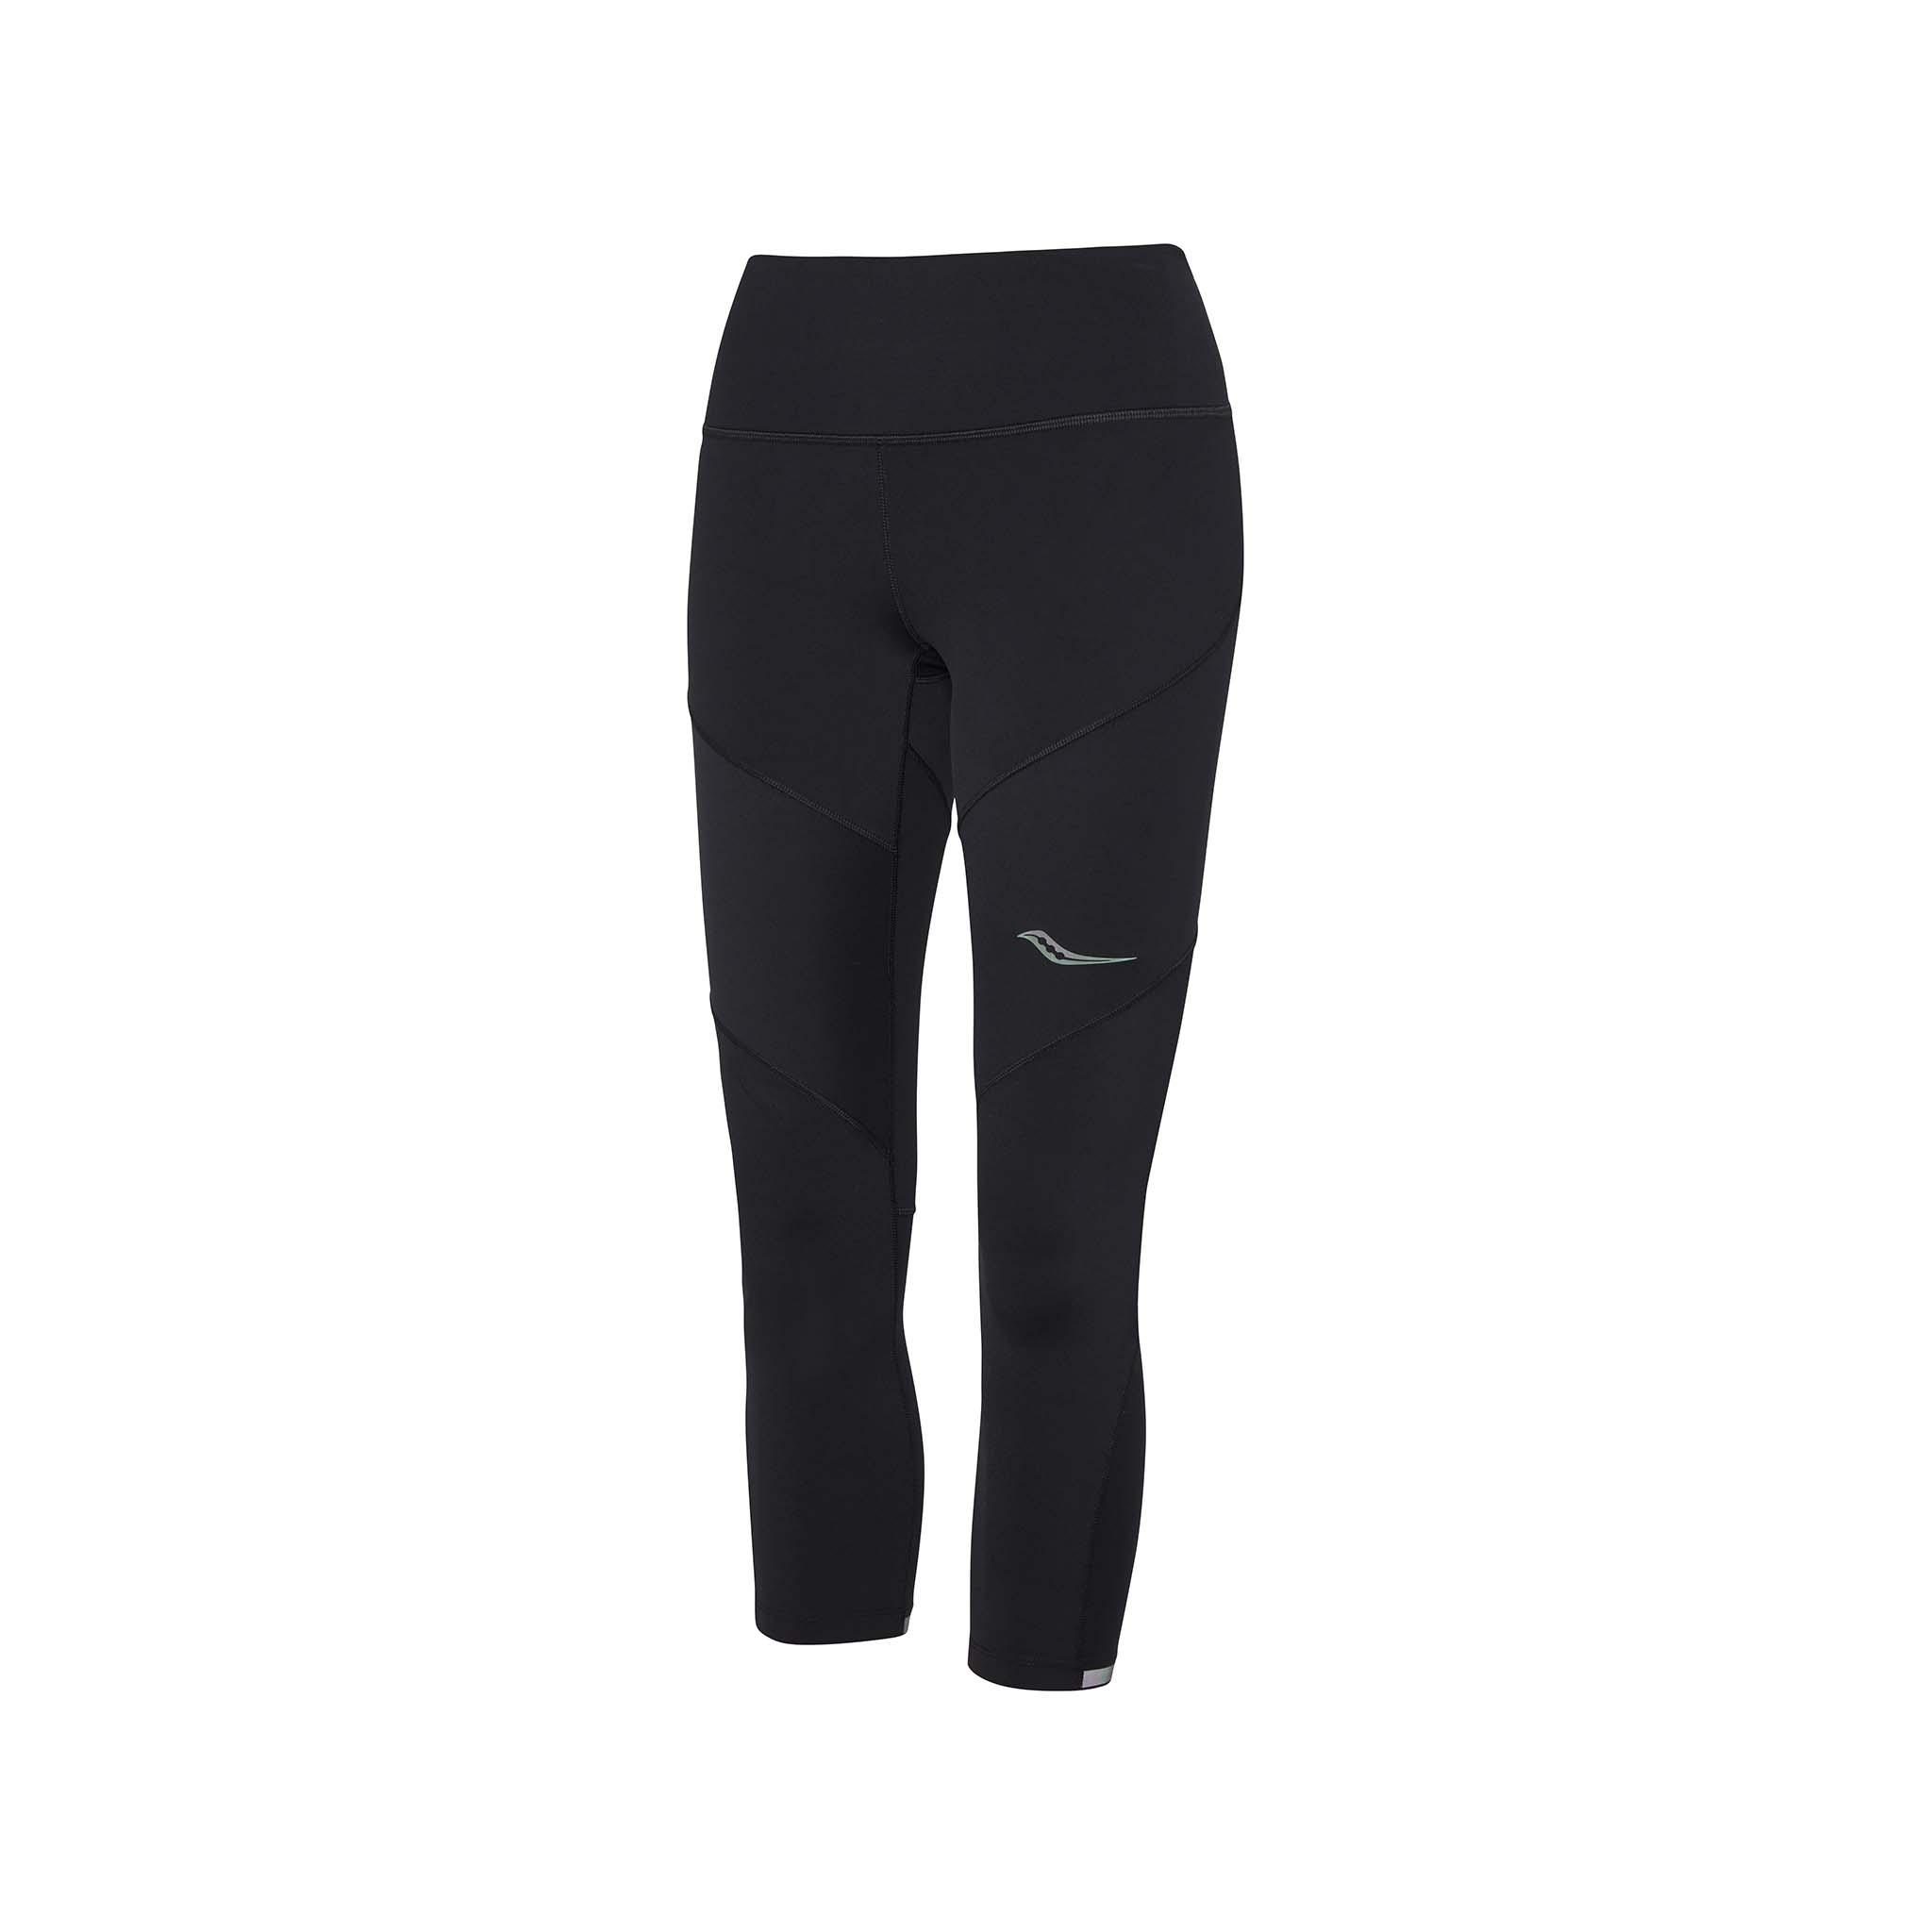 Saucony Time Trial Crop Tight running leggings for women - Soccer Sport  Fitness